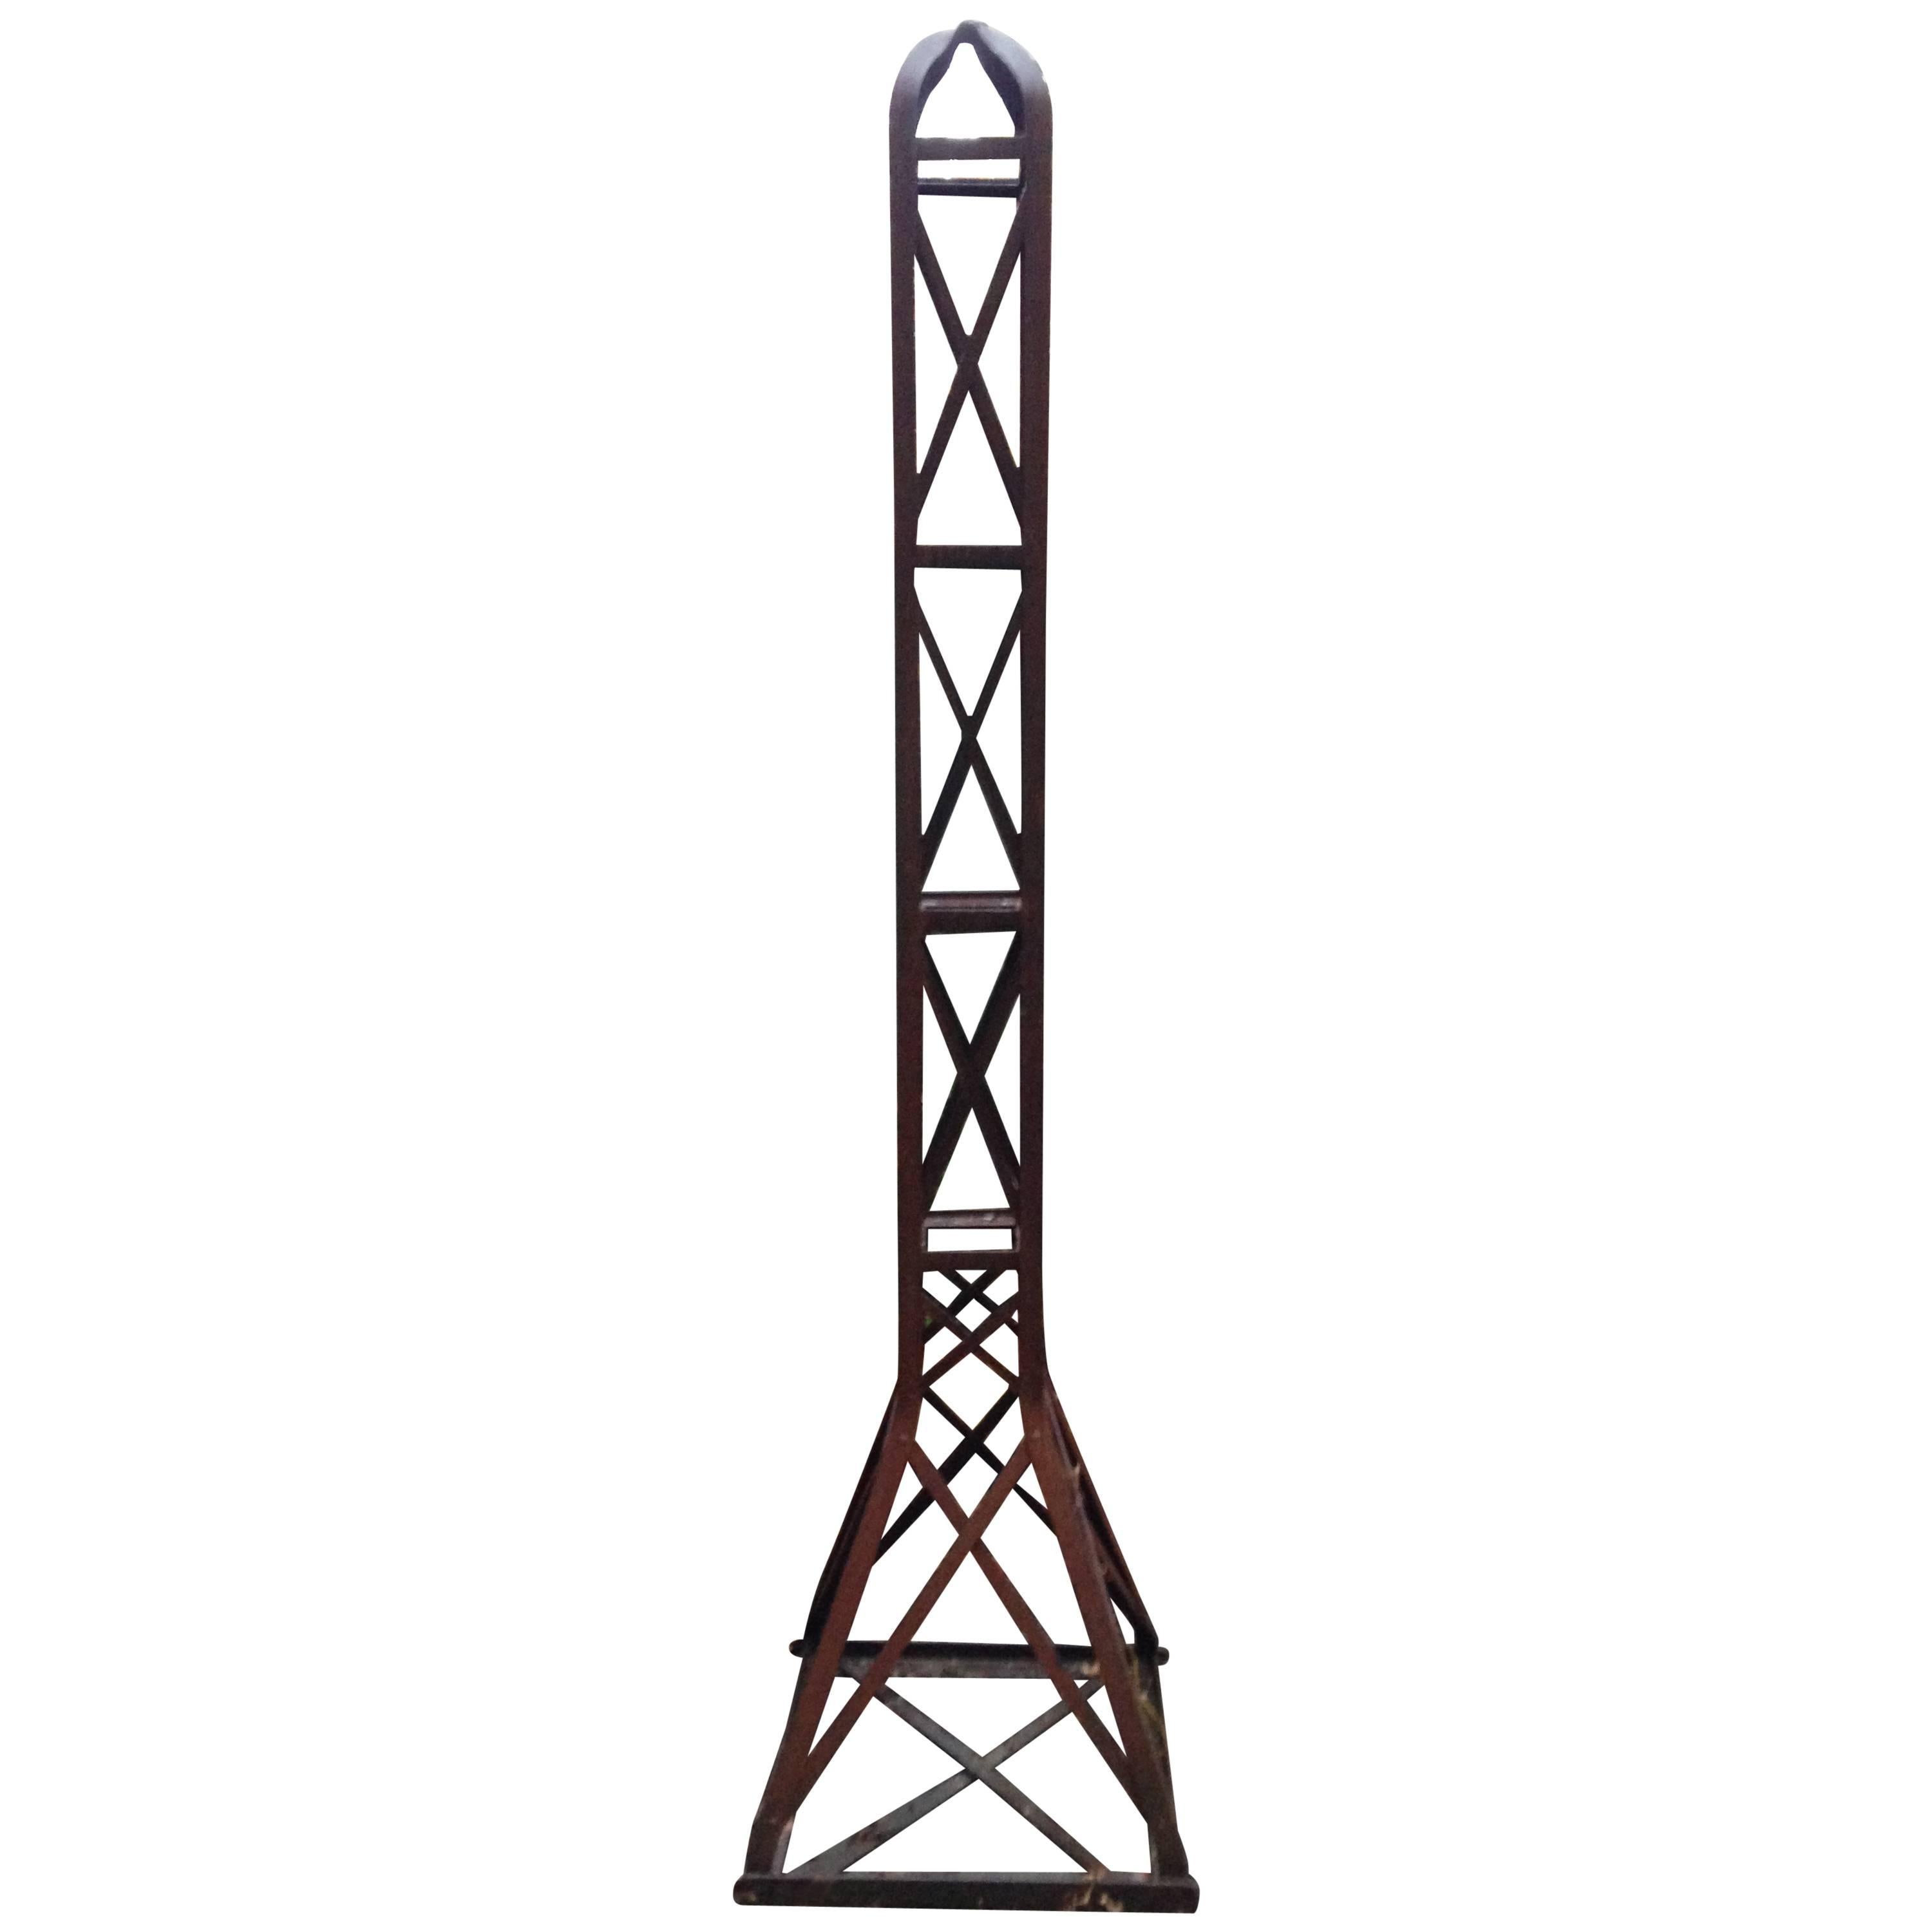 Stunning, Rare French early modernist wrought iron freestanding sculpture / obelisk in a Modern Industrial style reflecting the late 19th century and early 20th century fascination with the Eiffel Tower. A sober work in iron that references early